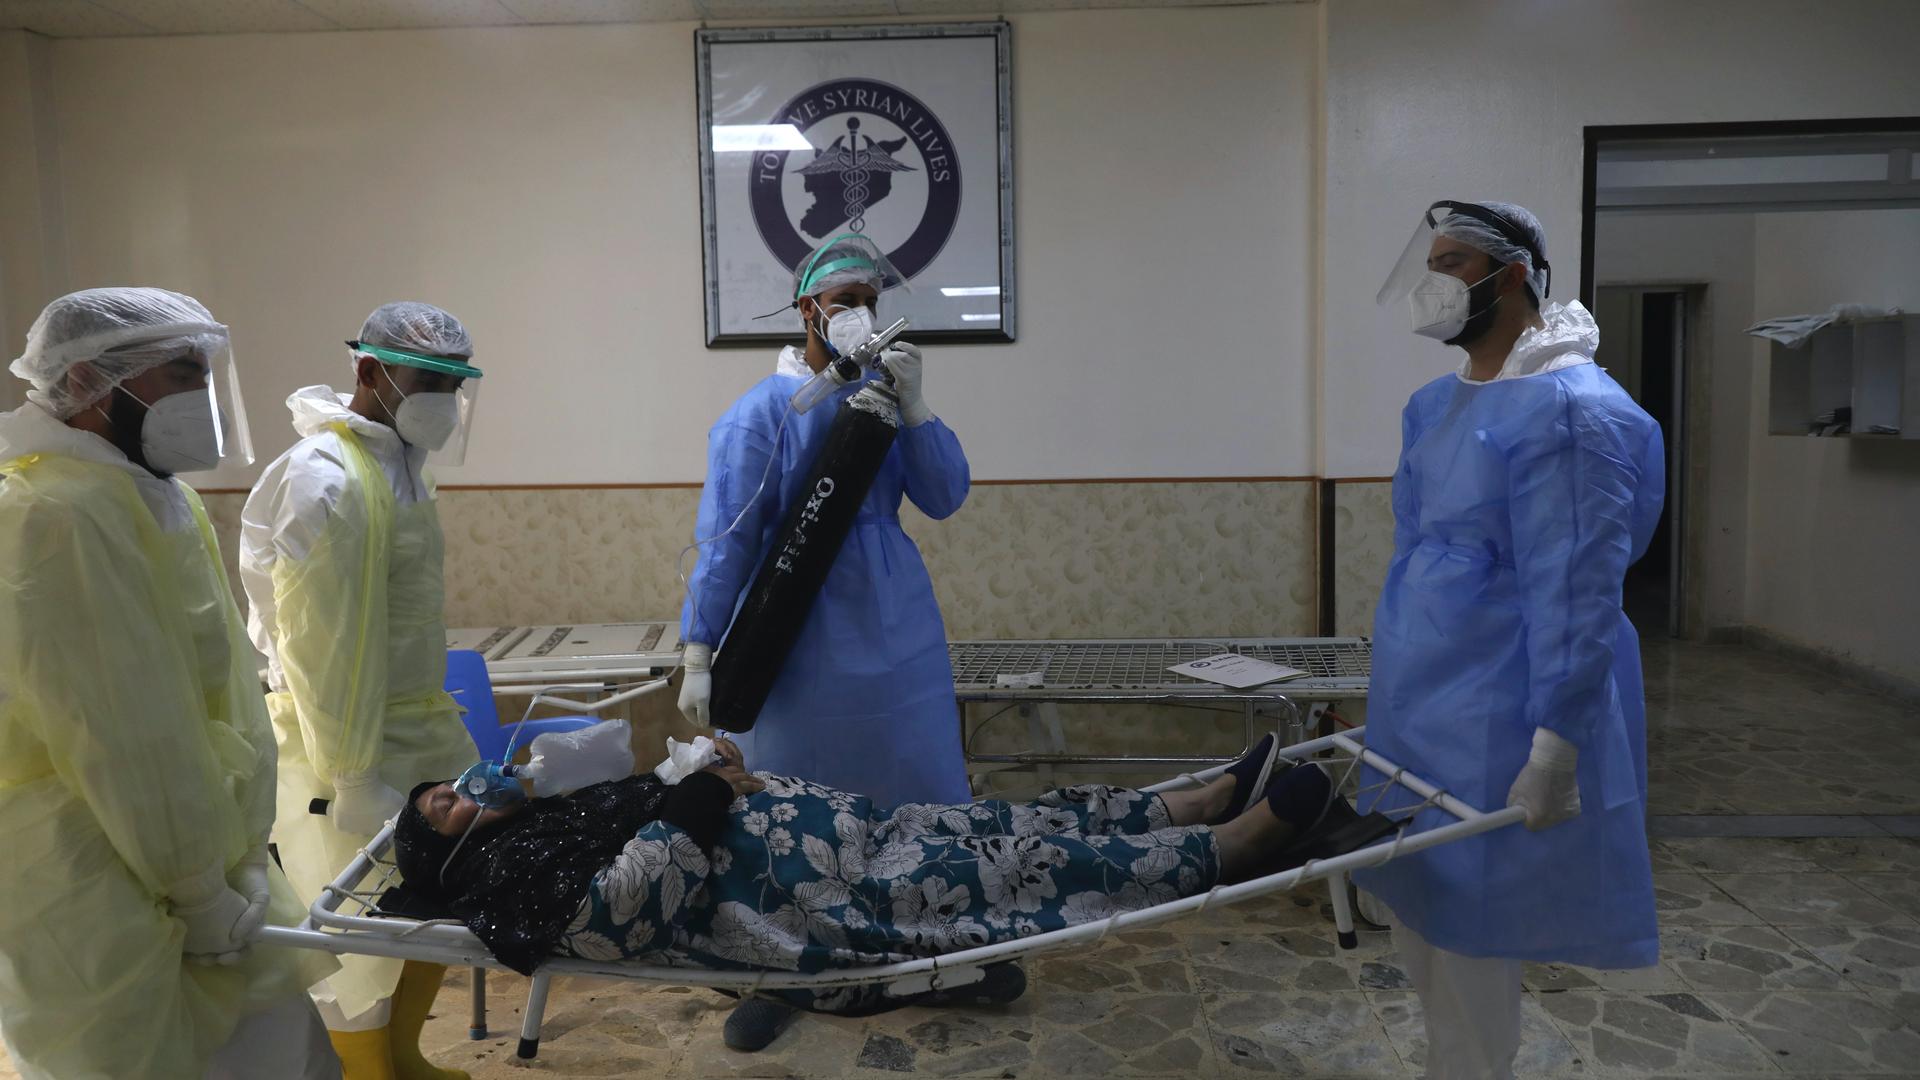 Medical workers carry a patient infected with the coronavirus on a stretcher at the Syrian American Medical Society Hospital, in the city of Idlib, northwest Syria, Sept. 20, 2021. 